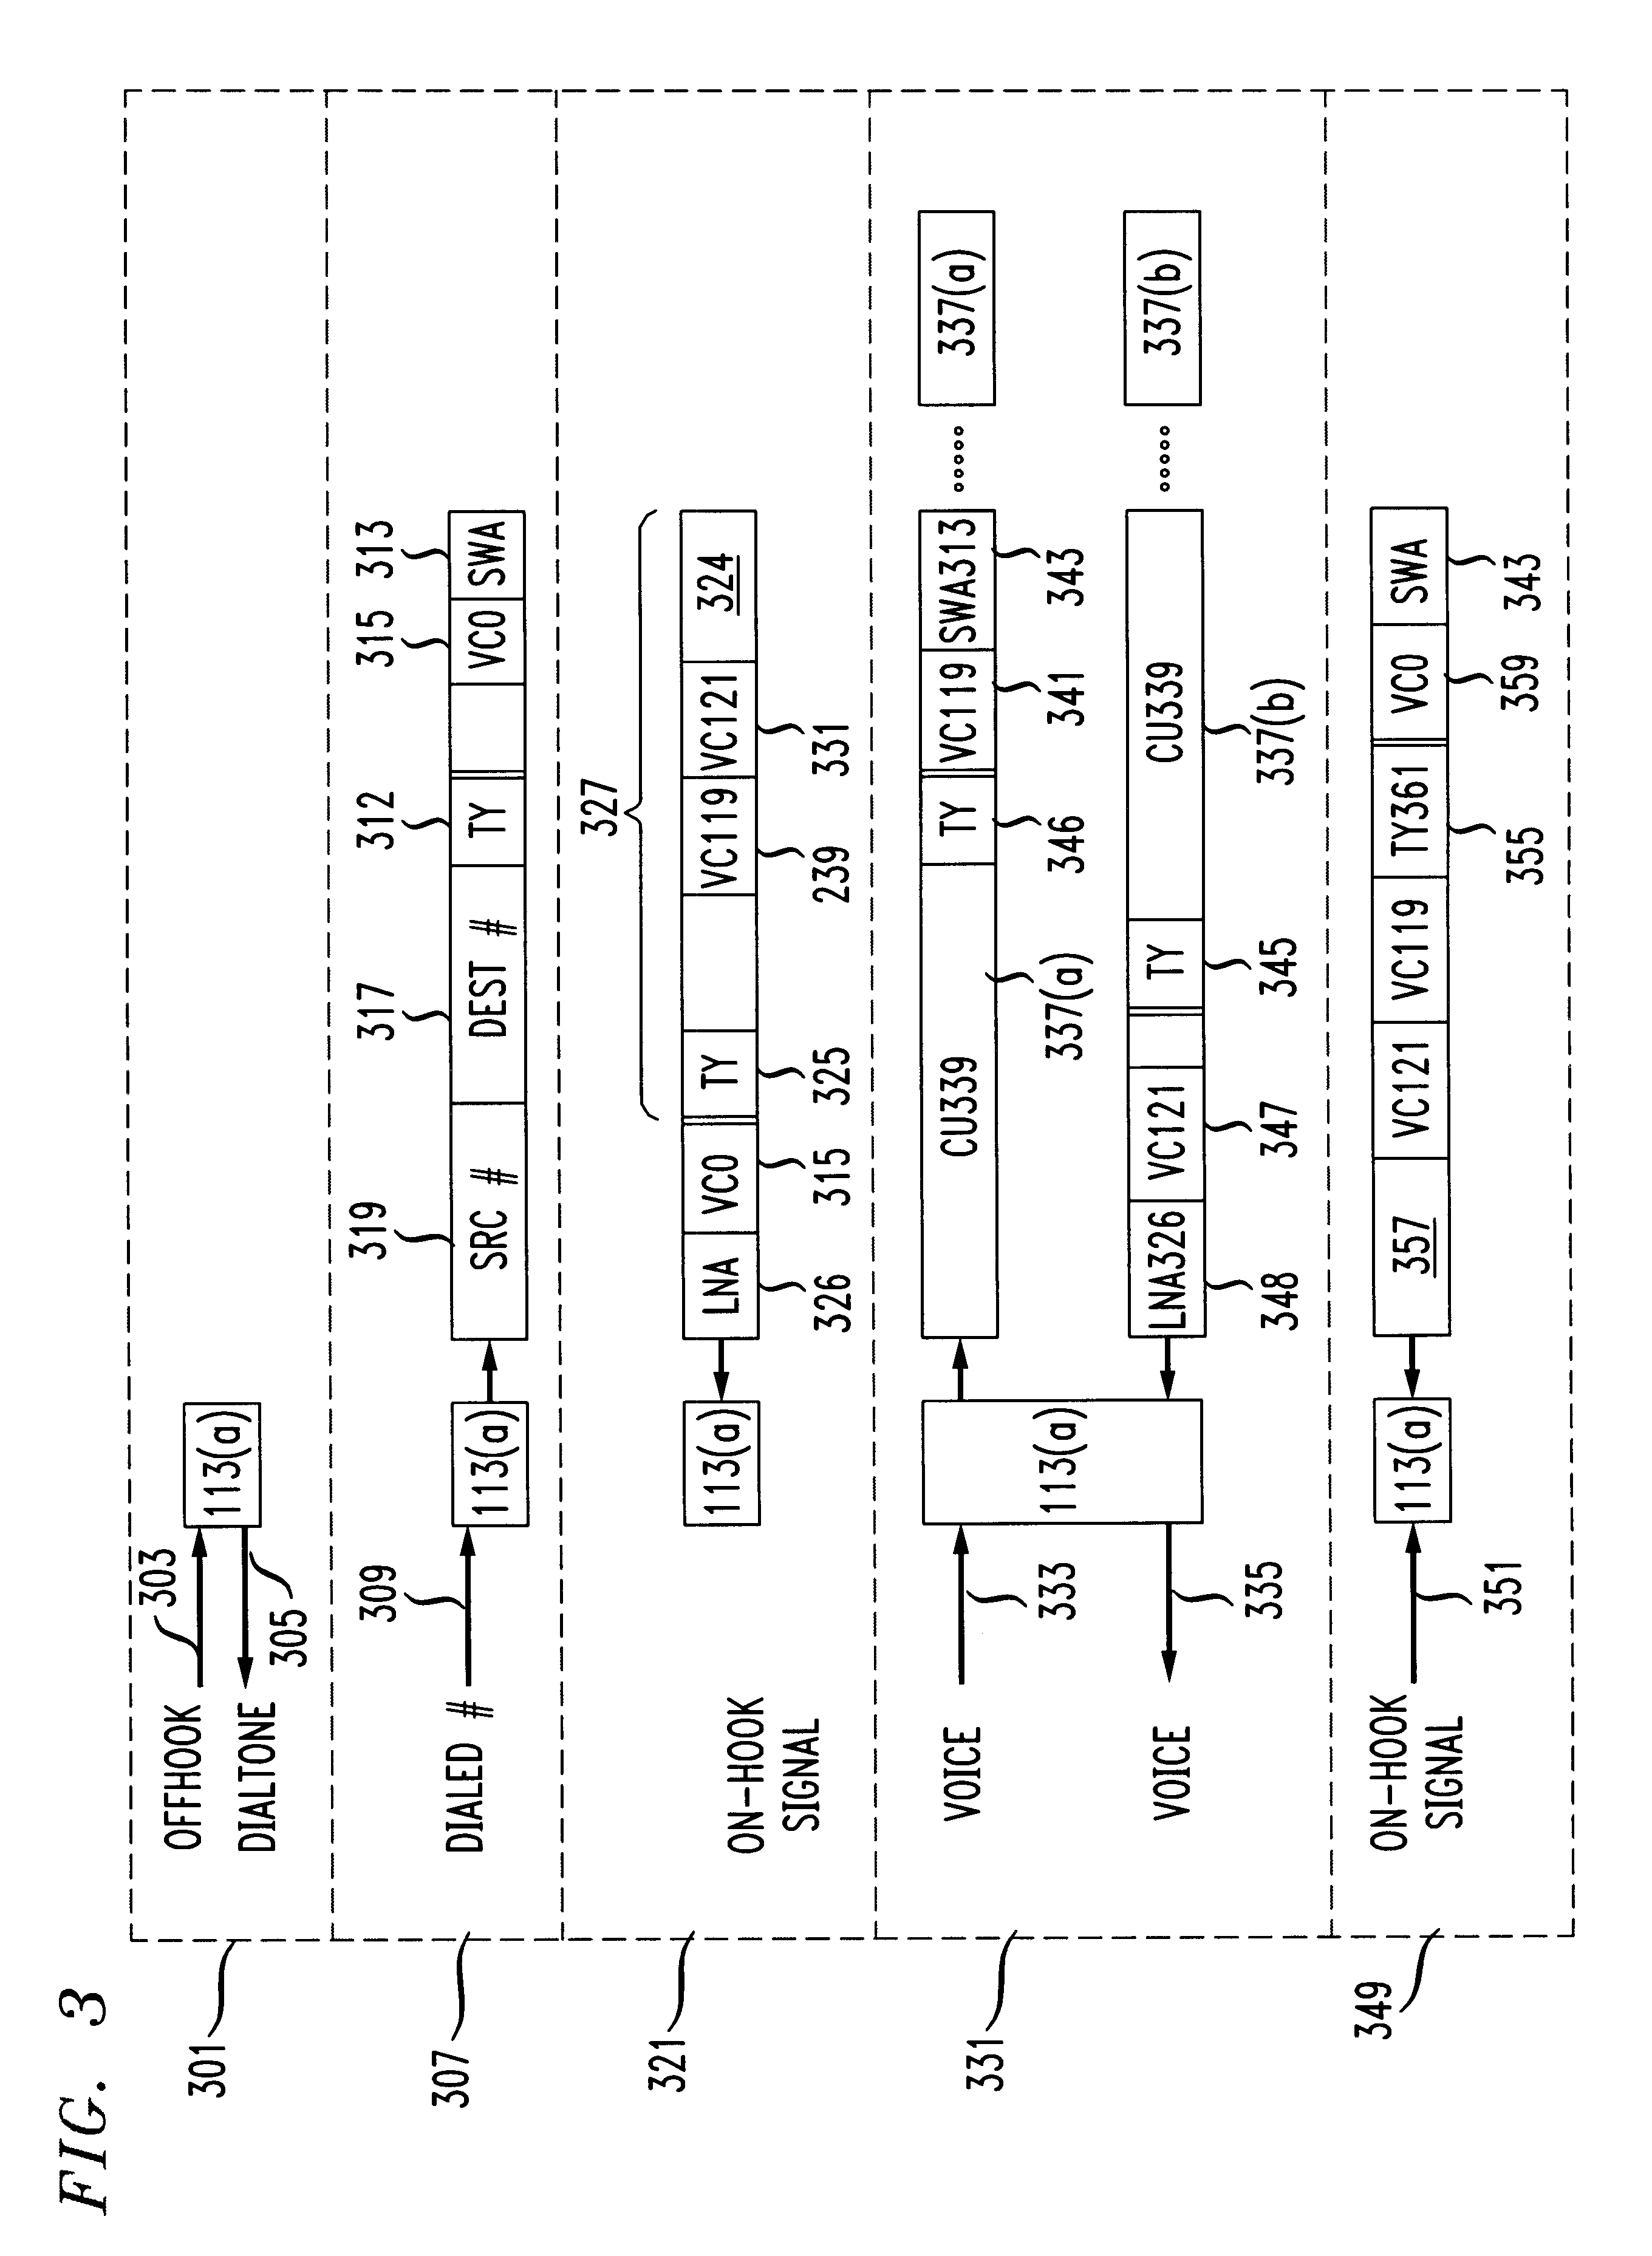 Packet telephone system